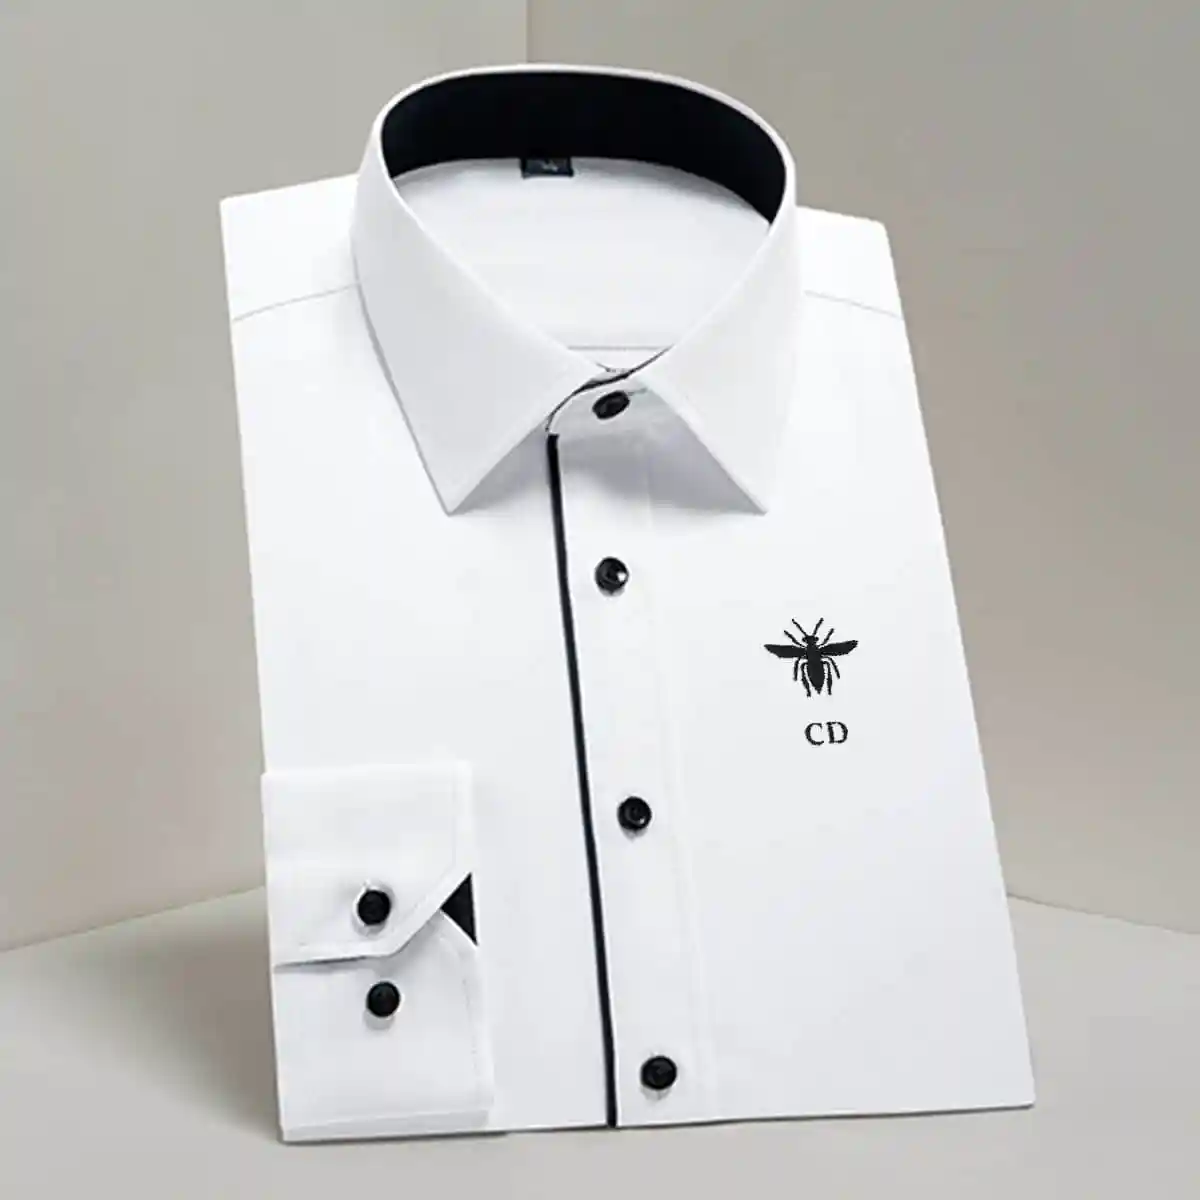 

Mens Luxury Brand Christian CD Spider Embroidery Shirts Male Button Up Blouse Covered Business Standard-fit Long Sleeve Shirts